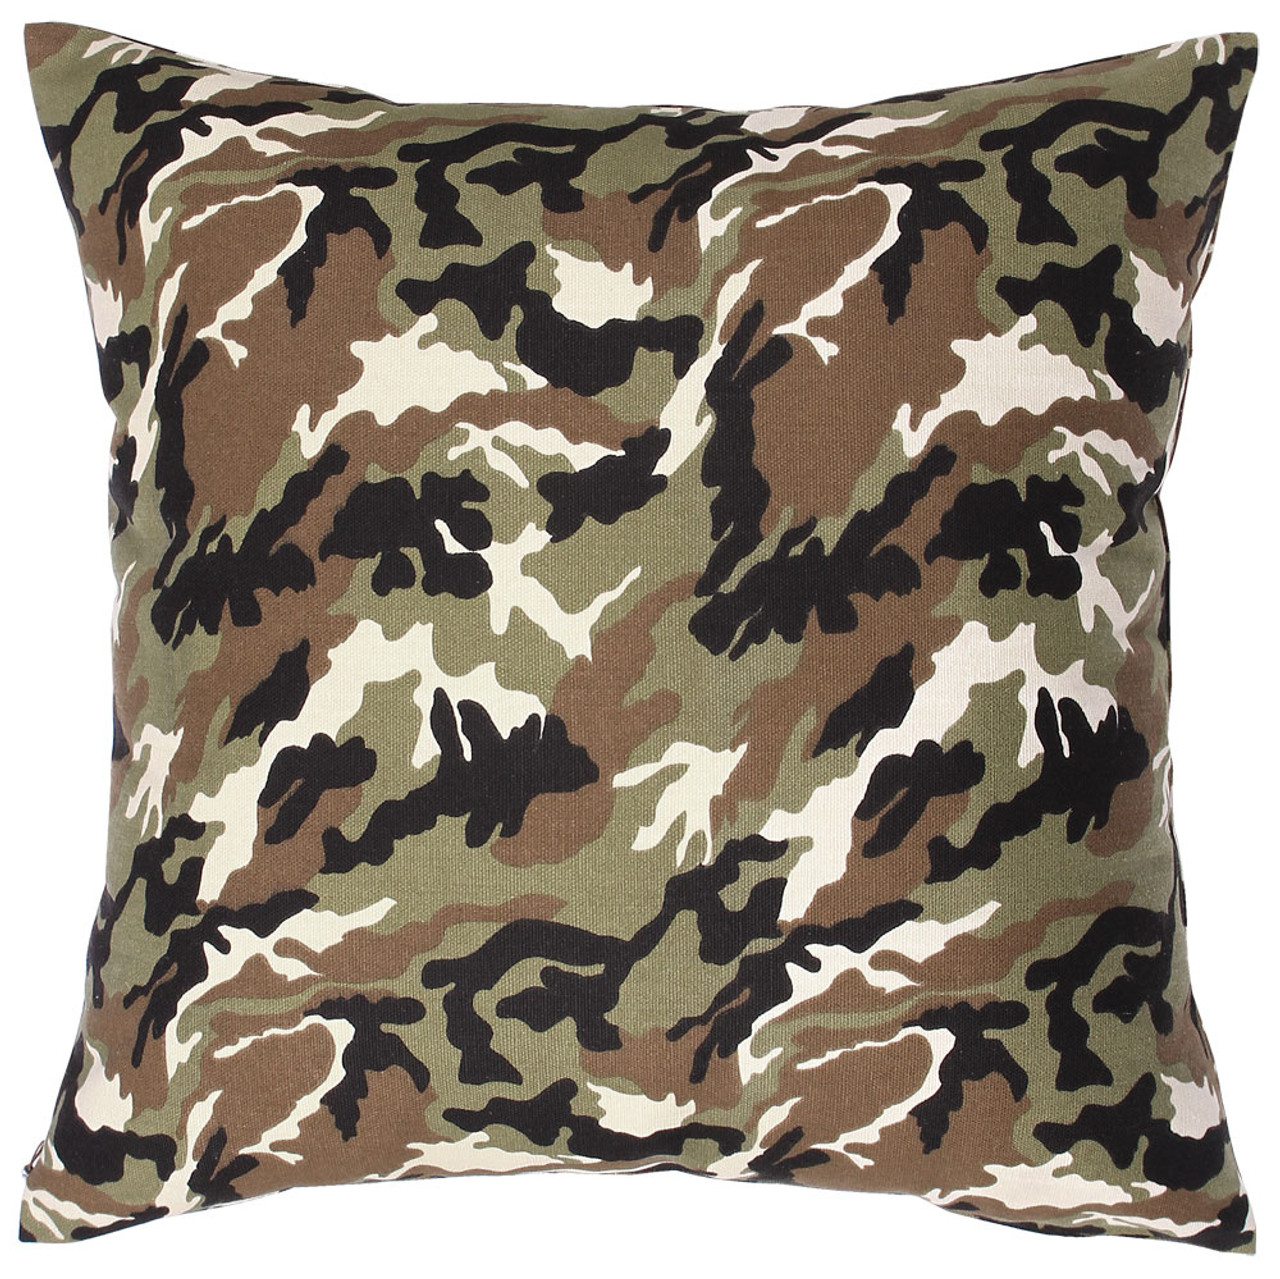 TangDepot® Camouflage Throw Pillow Cover, Camo Pillow Cases - 100% Cotton Canvas, Handmade - Many Colors & Sizes Avaliable